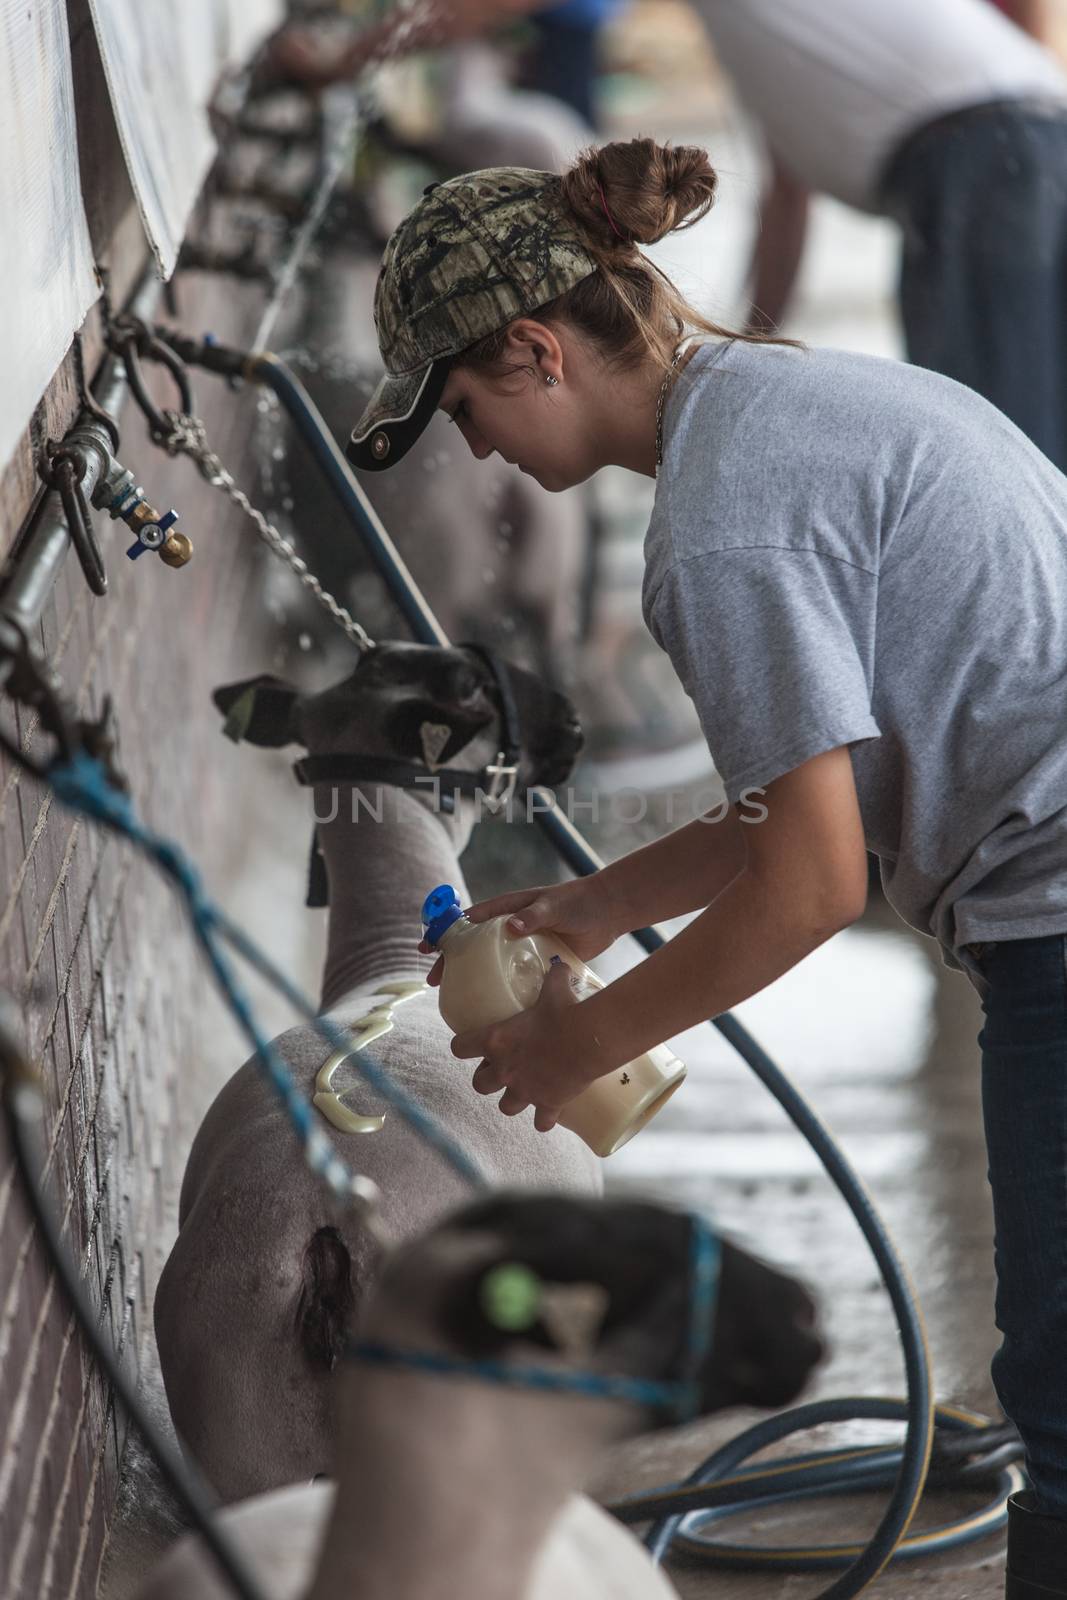 DES MOINES, IA /USA - AUGUST 10: Unidentified young woman putting lotion on sheep at Iowa State Fair on August 10, 2014 in Des Moines, Iowa, USA.